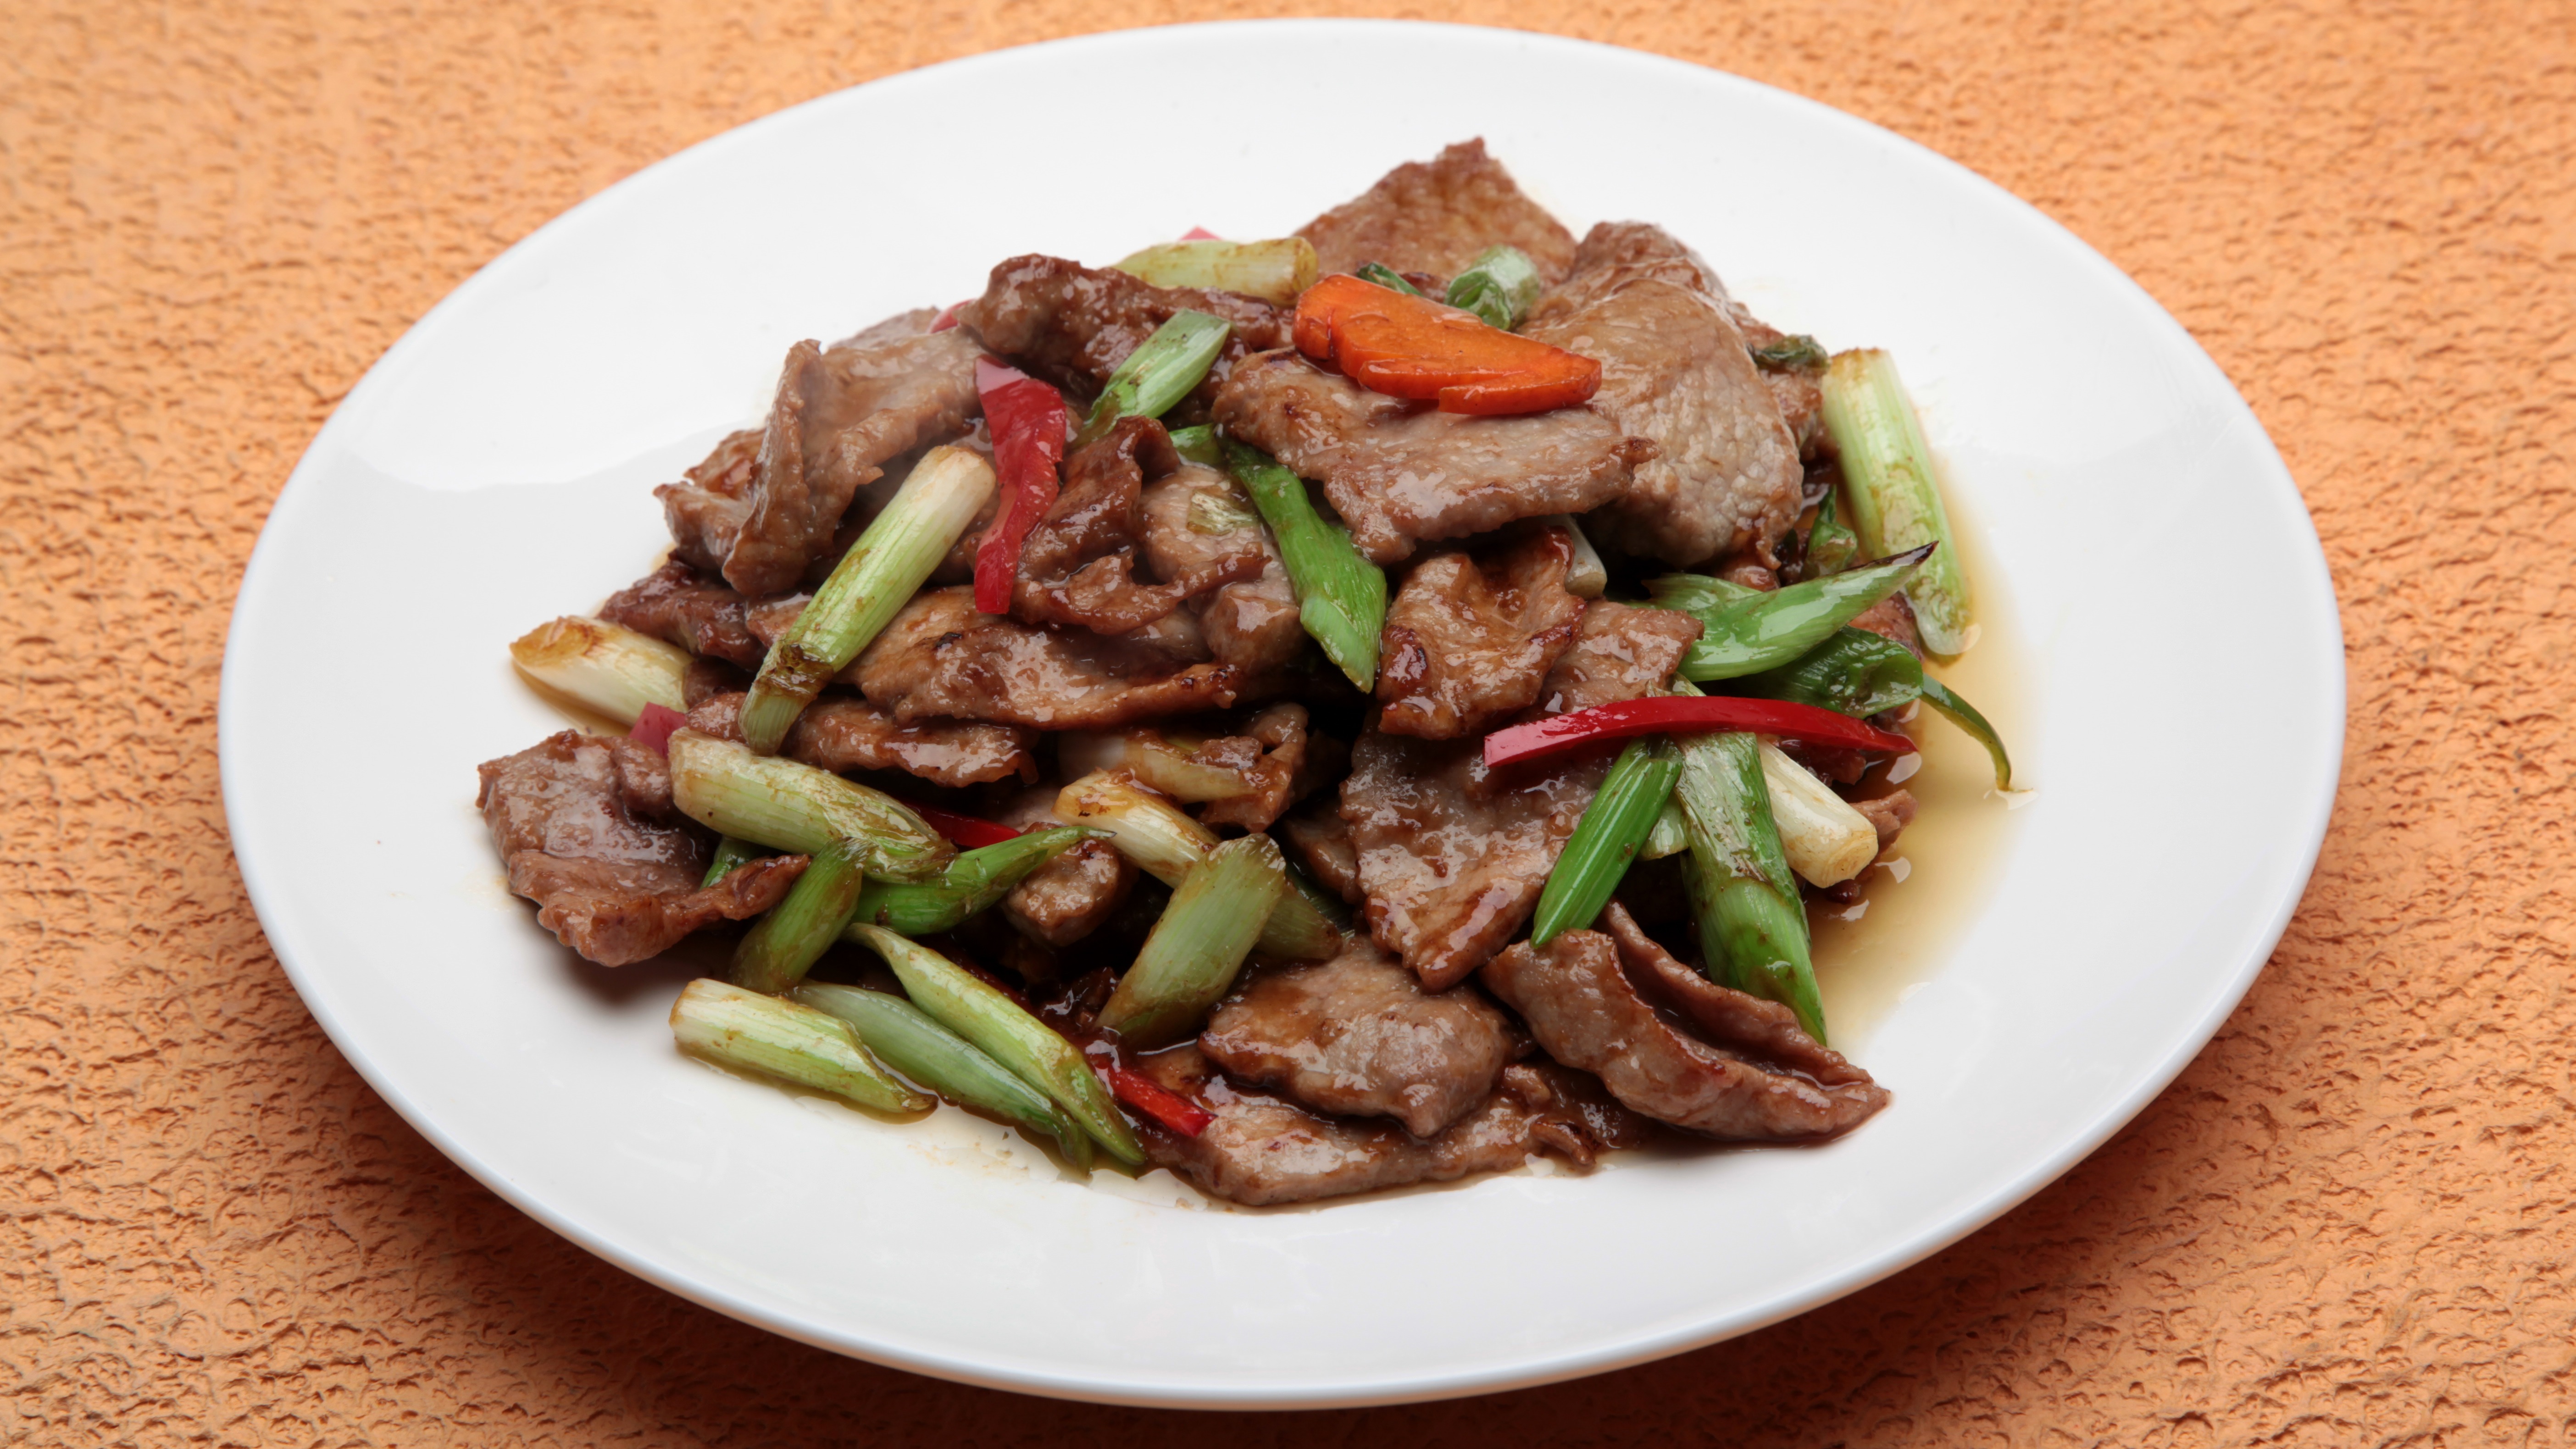 Beef with Green Onion 葱爆牛肉